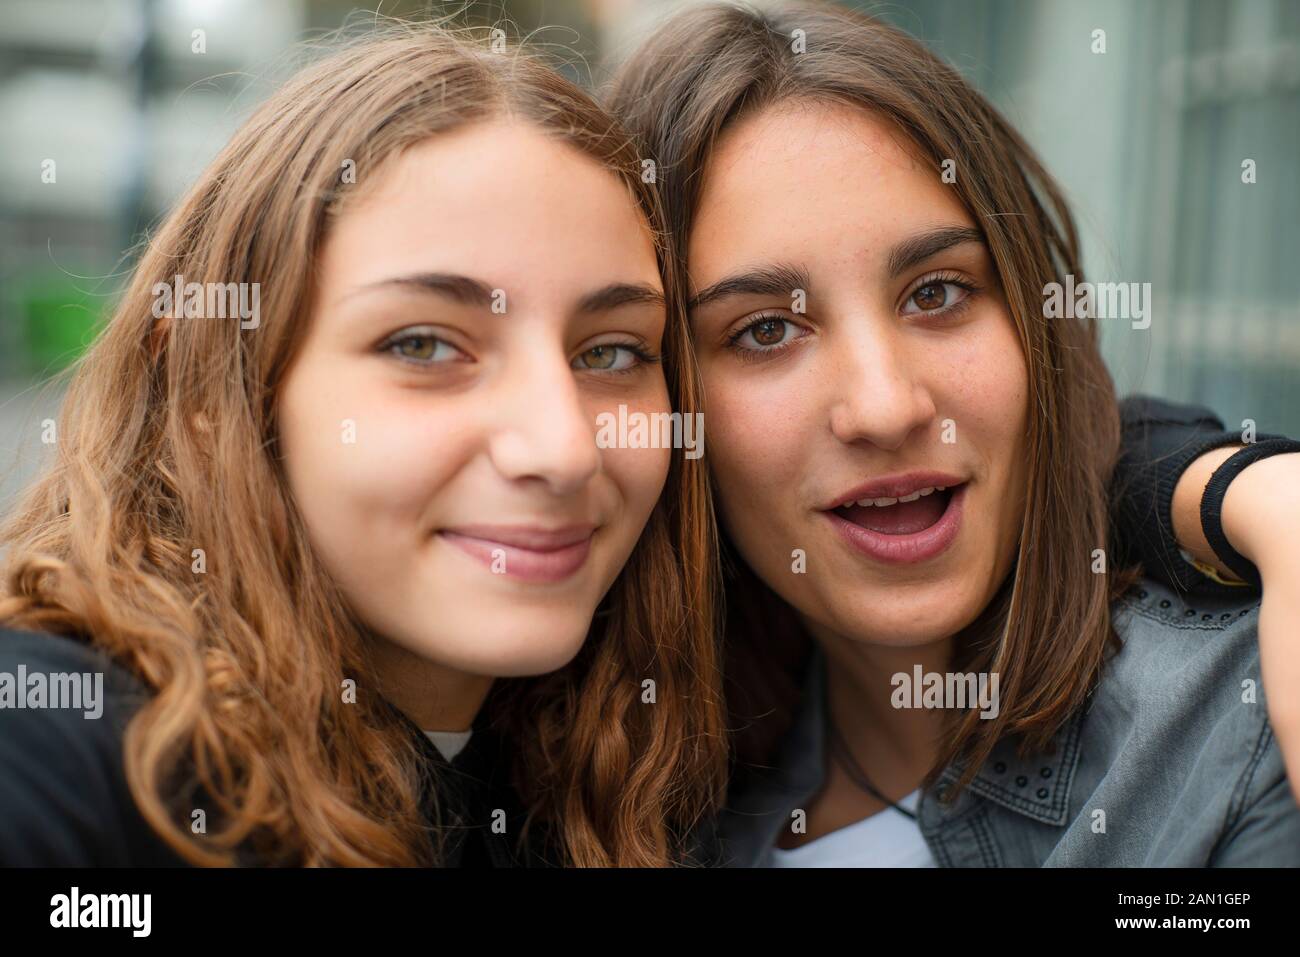 Close-up of smiling friends Stock Photo